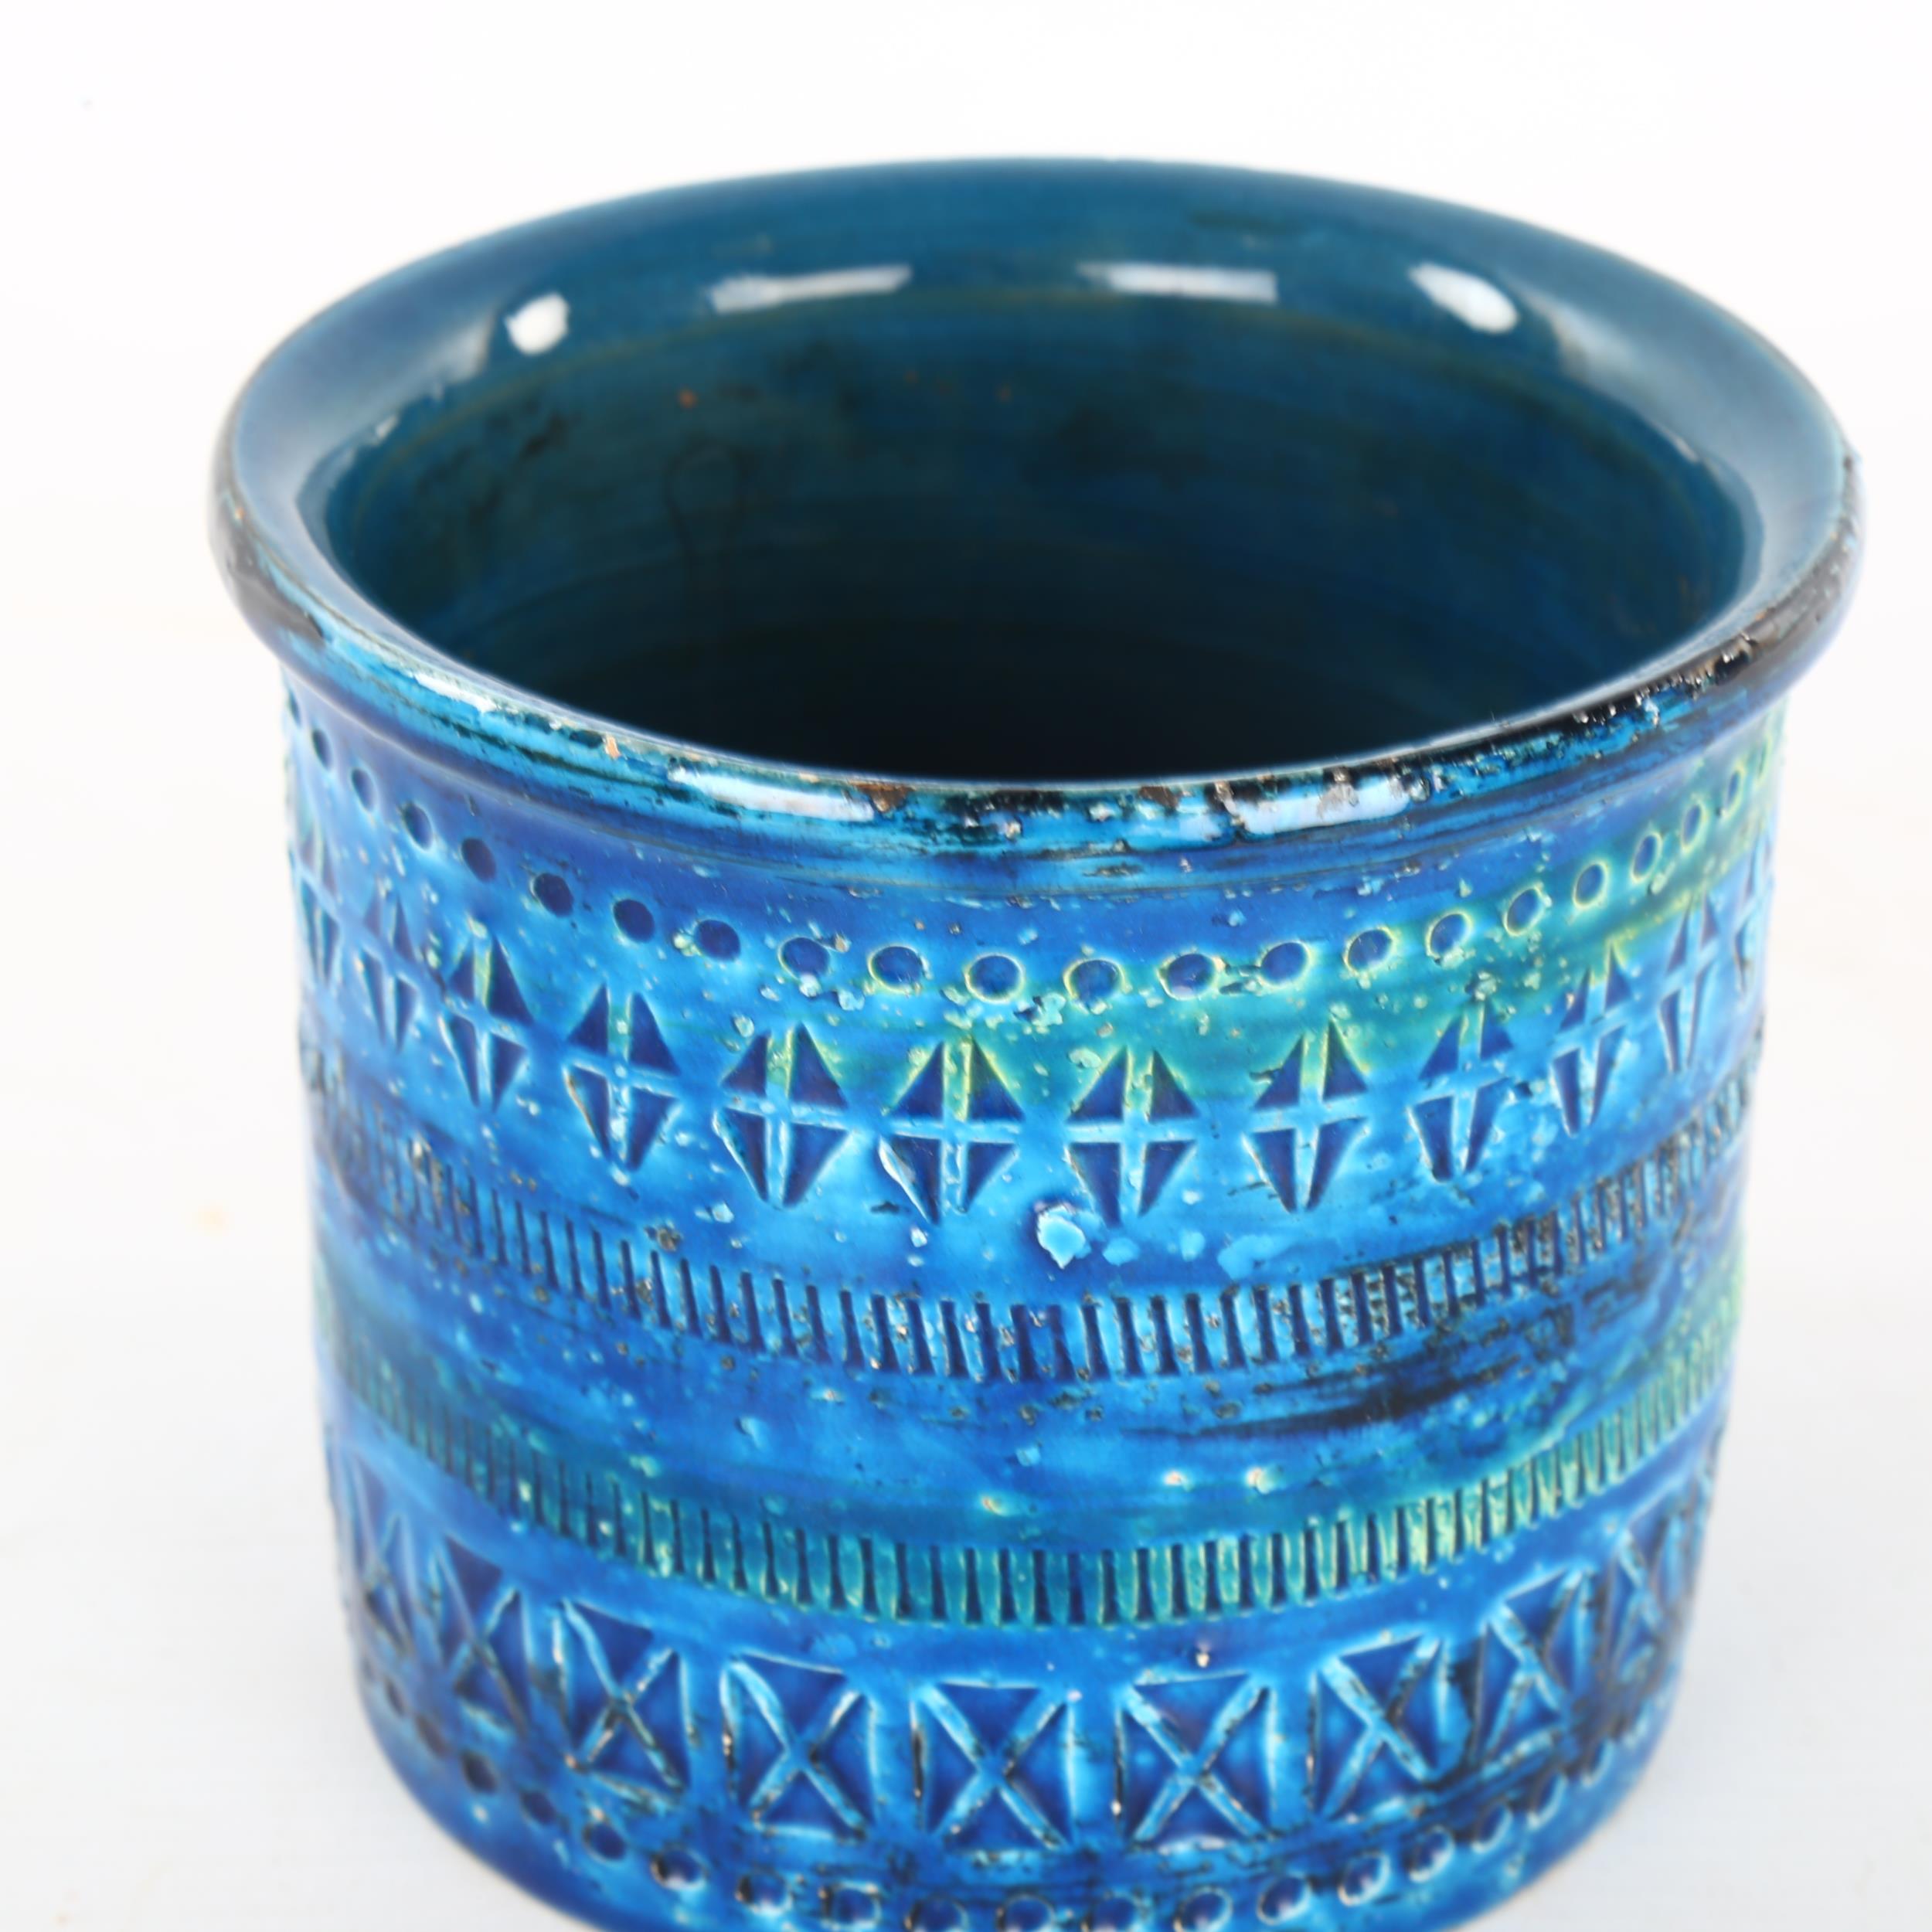 ALDO LONDI for Bitossi, a Rimini Blue planter/vase, stamped AH 80/12 Italy to base, height 10.5cm - Image 4 of 4